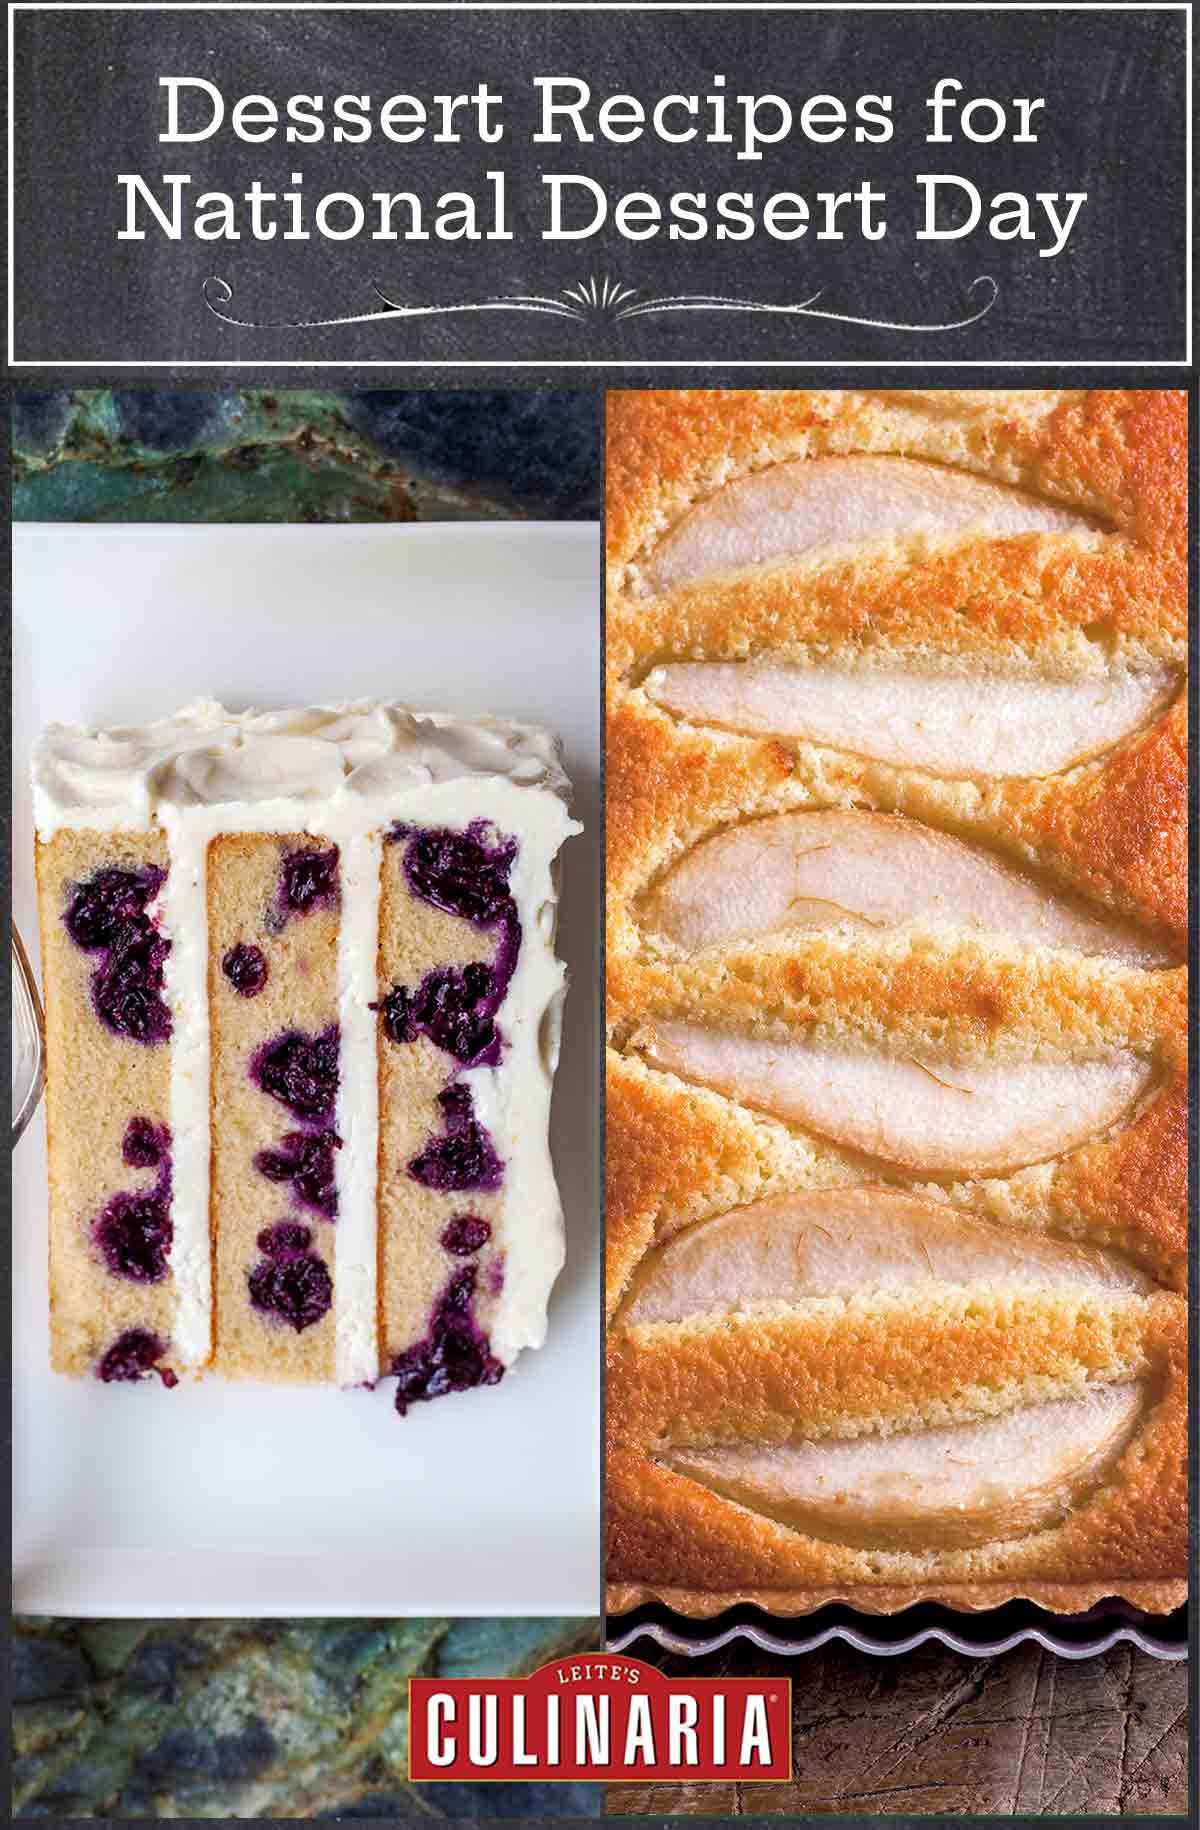 A grid of 2 photos for dessert day for National Dessert Day, including blueberry lemon layer cake and pear almond tart.